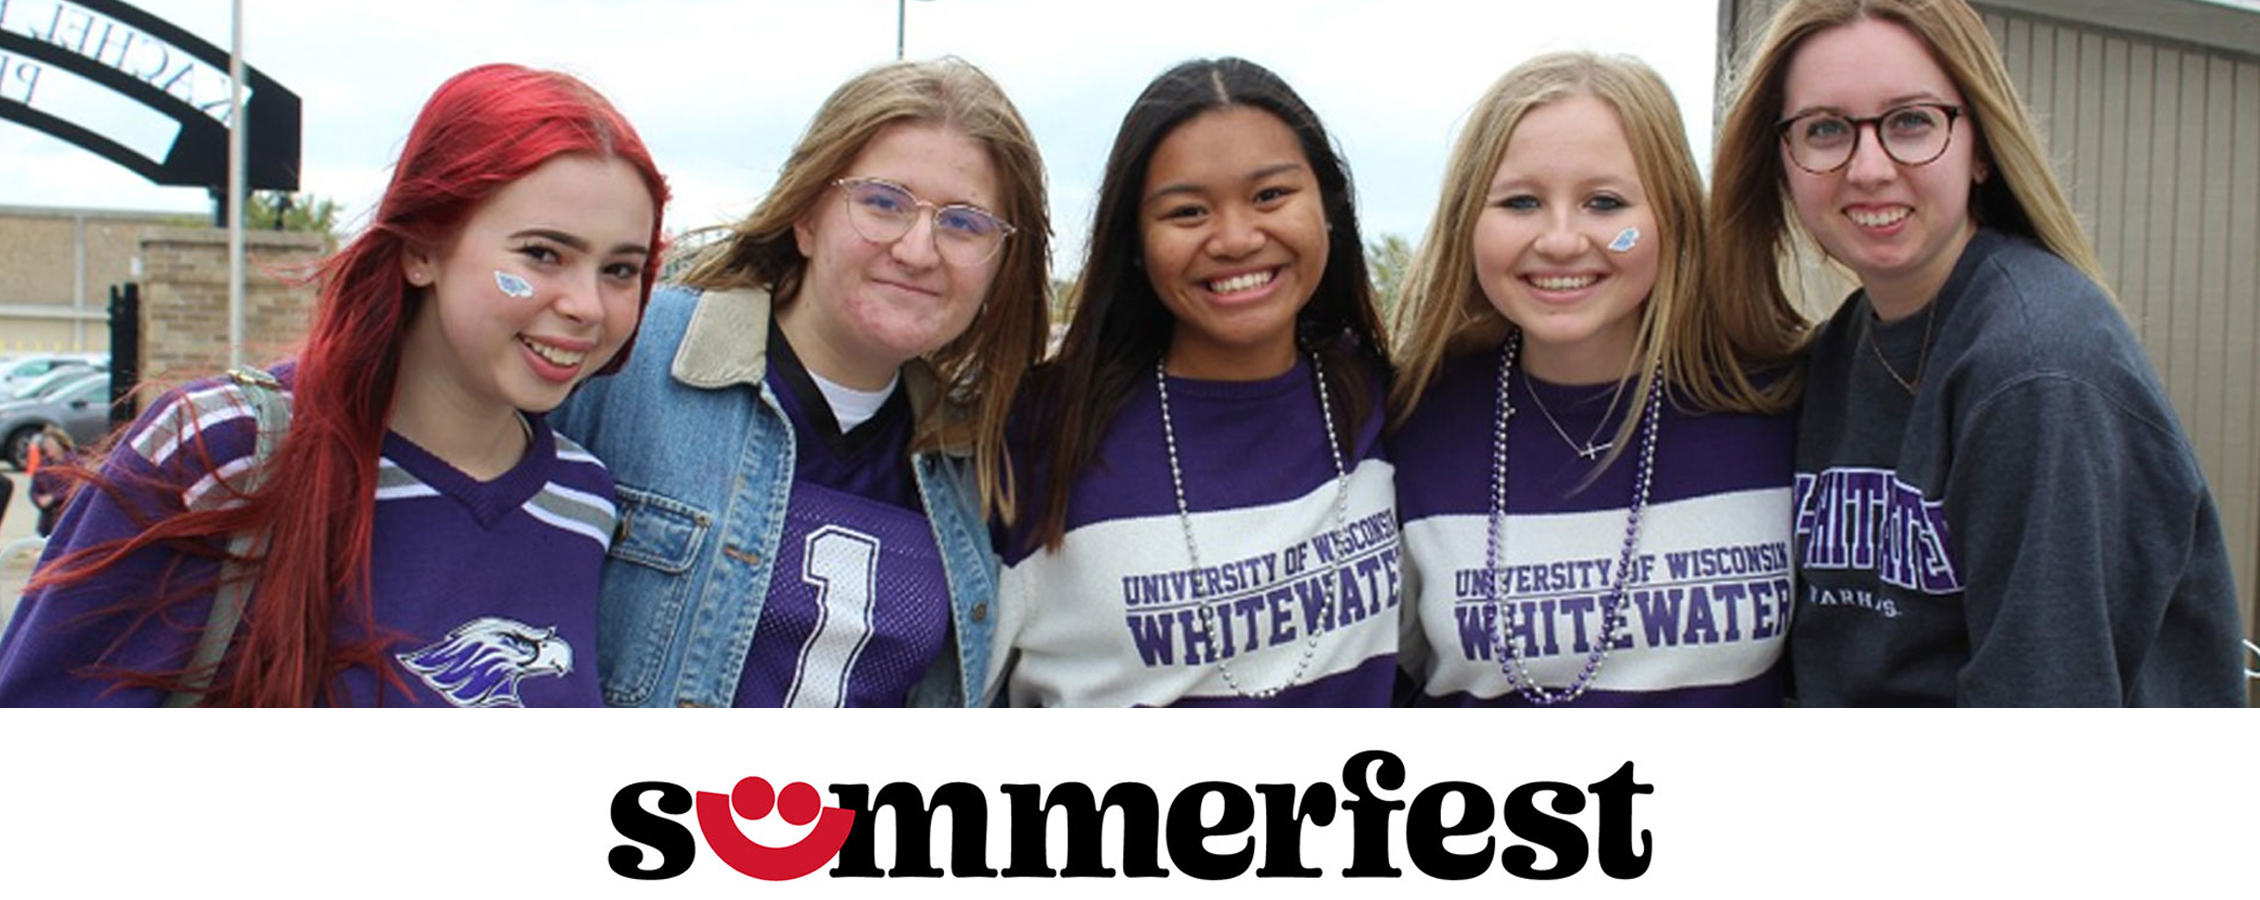 Five young people wearing UW-Whitewater shirts.